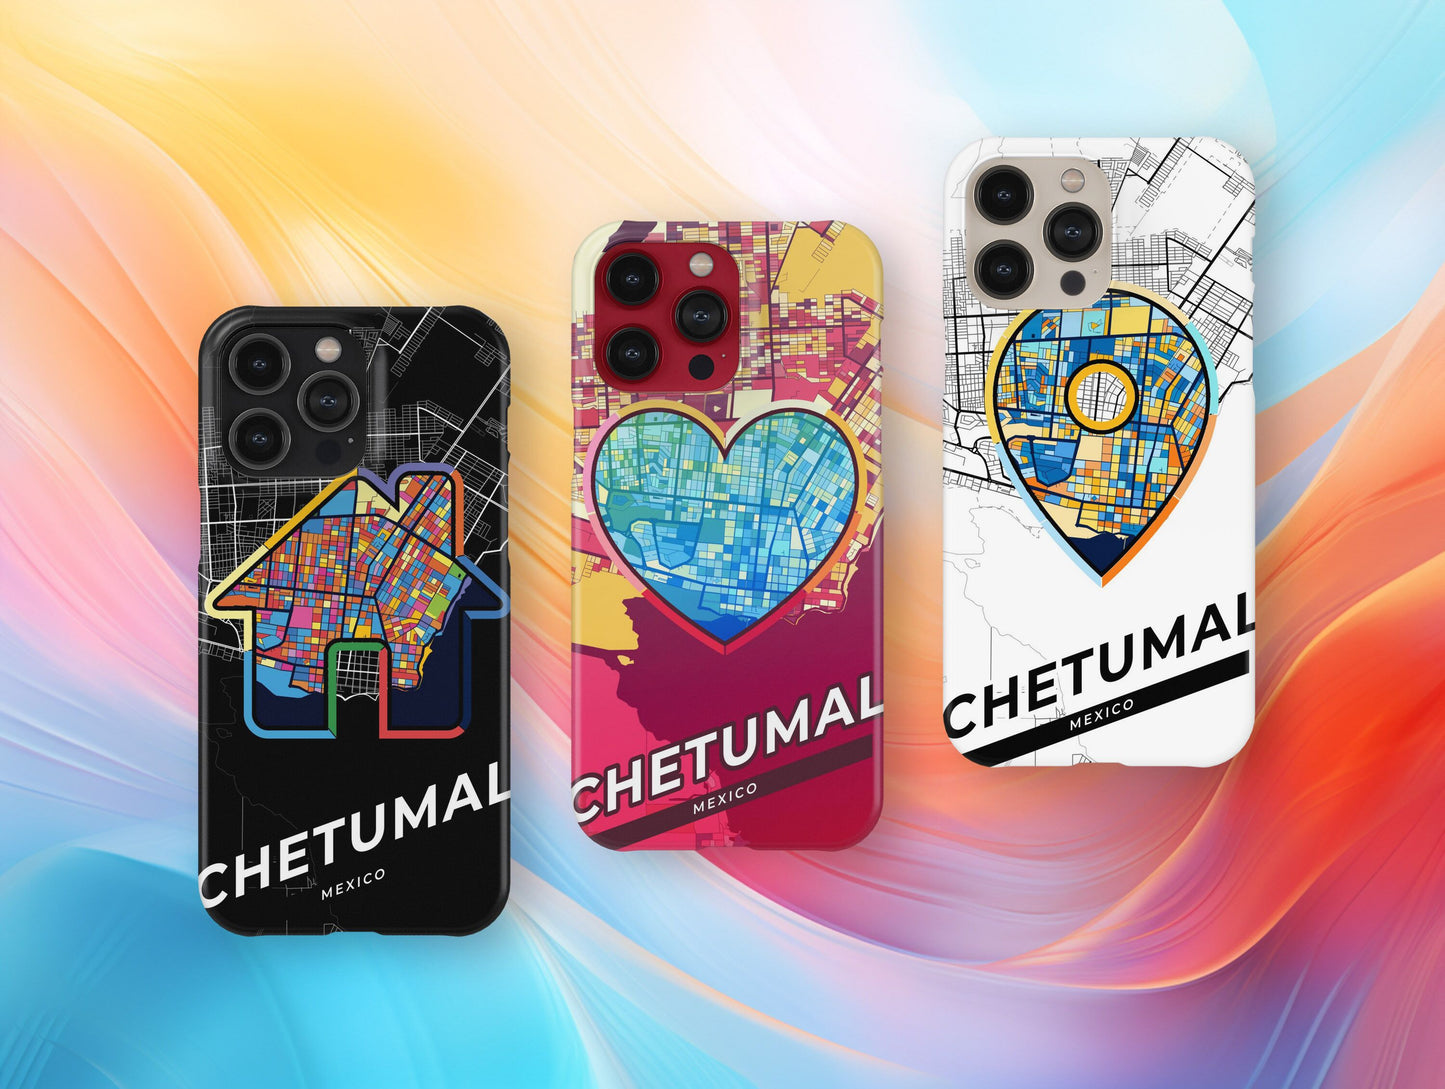 Chetumal Mexico slim phone case with colorful icon. Birthday, wedding or housewarming gift. Couple match cases.